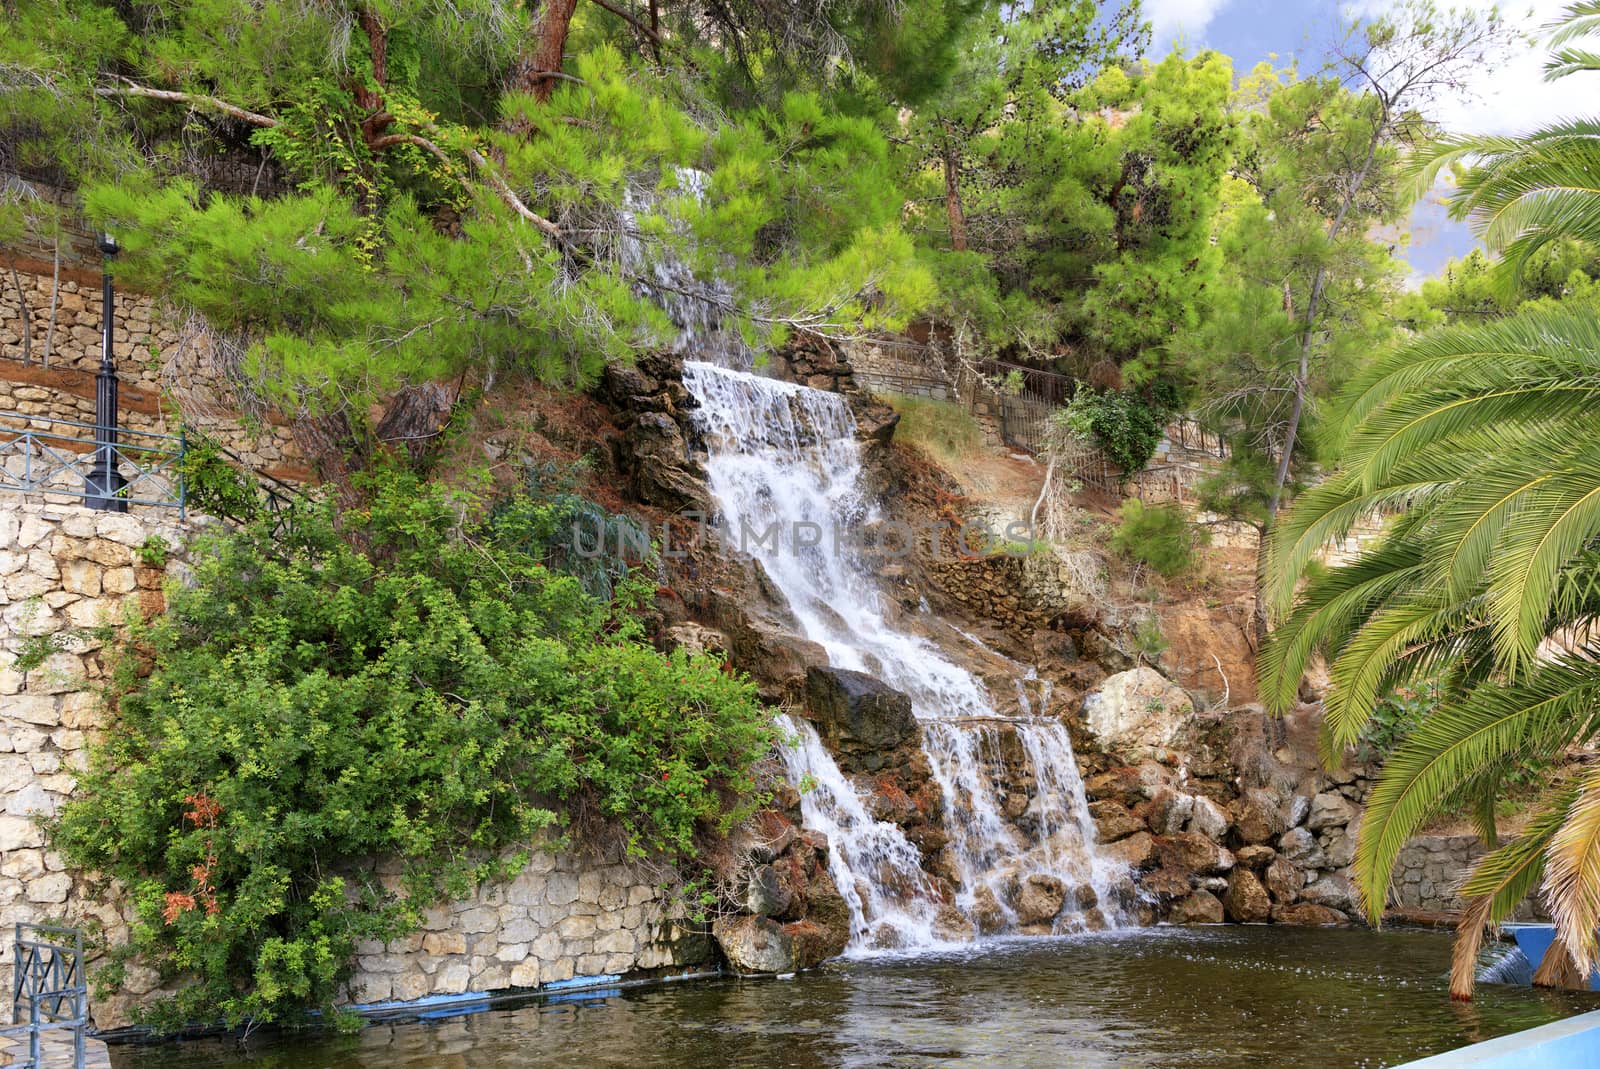 A large waterfall from a spring of radon water flows down large boulders at the foot of the mountain among the green Mediterranean pines and palm trees in the park of Loutraki, Greece.